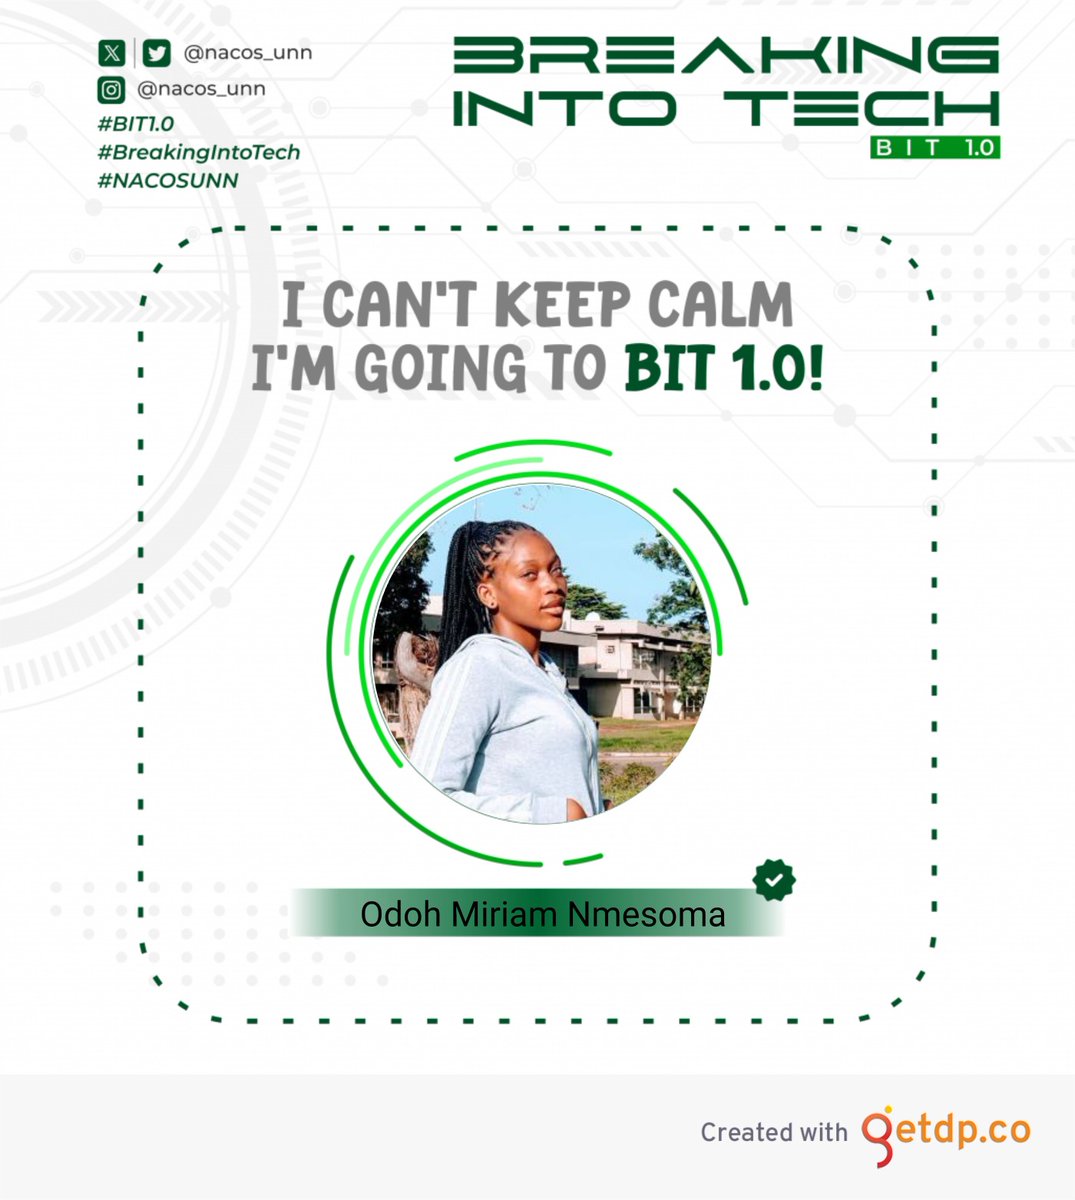 I will be attending BIT 1.0. 
Don't miss out on this great opportunity, it's happening at PAA, on Friday, 1st of march.
There is a lot to gain.
see you there🤭👍🤩
#BIT1.0
#BreakingintoTech
#NACOSUNN